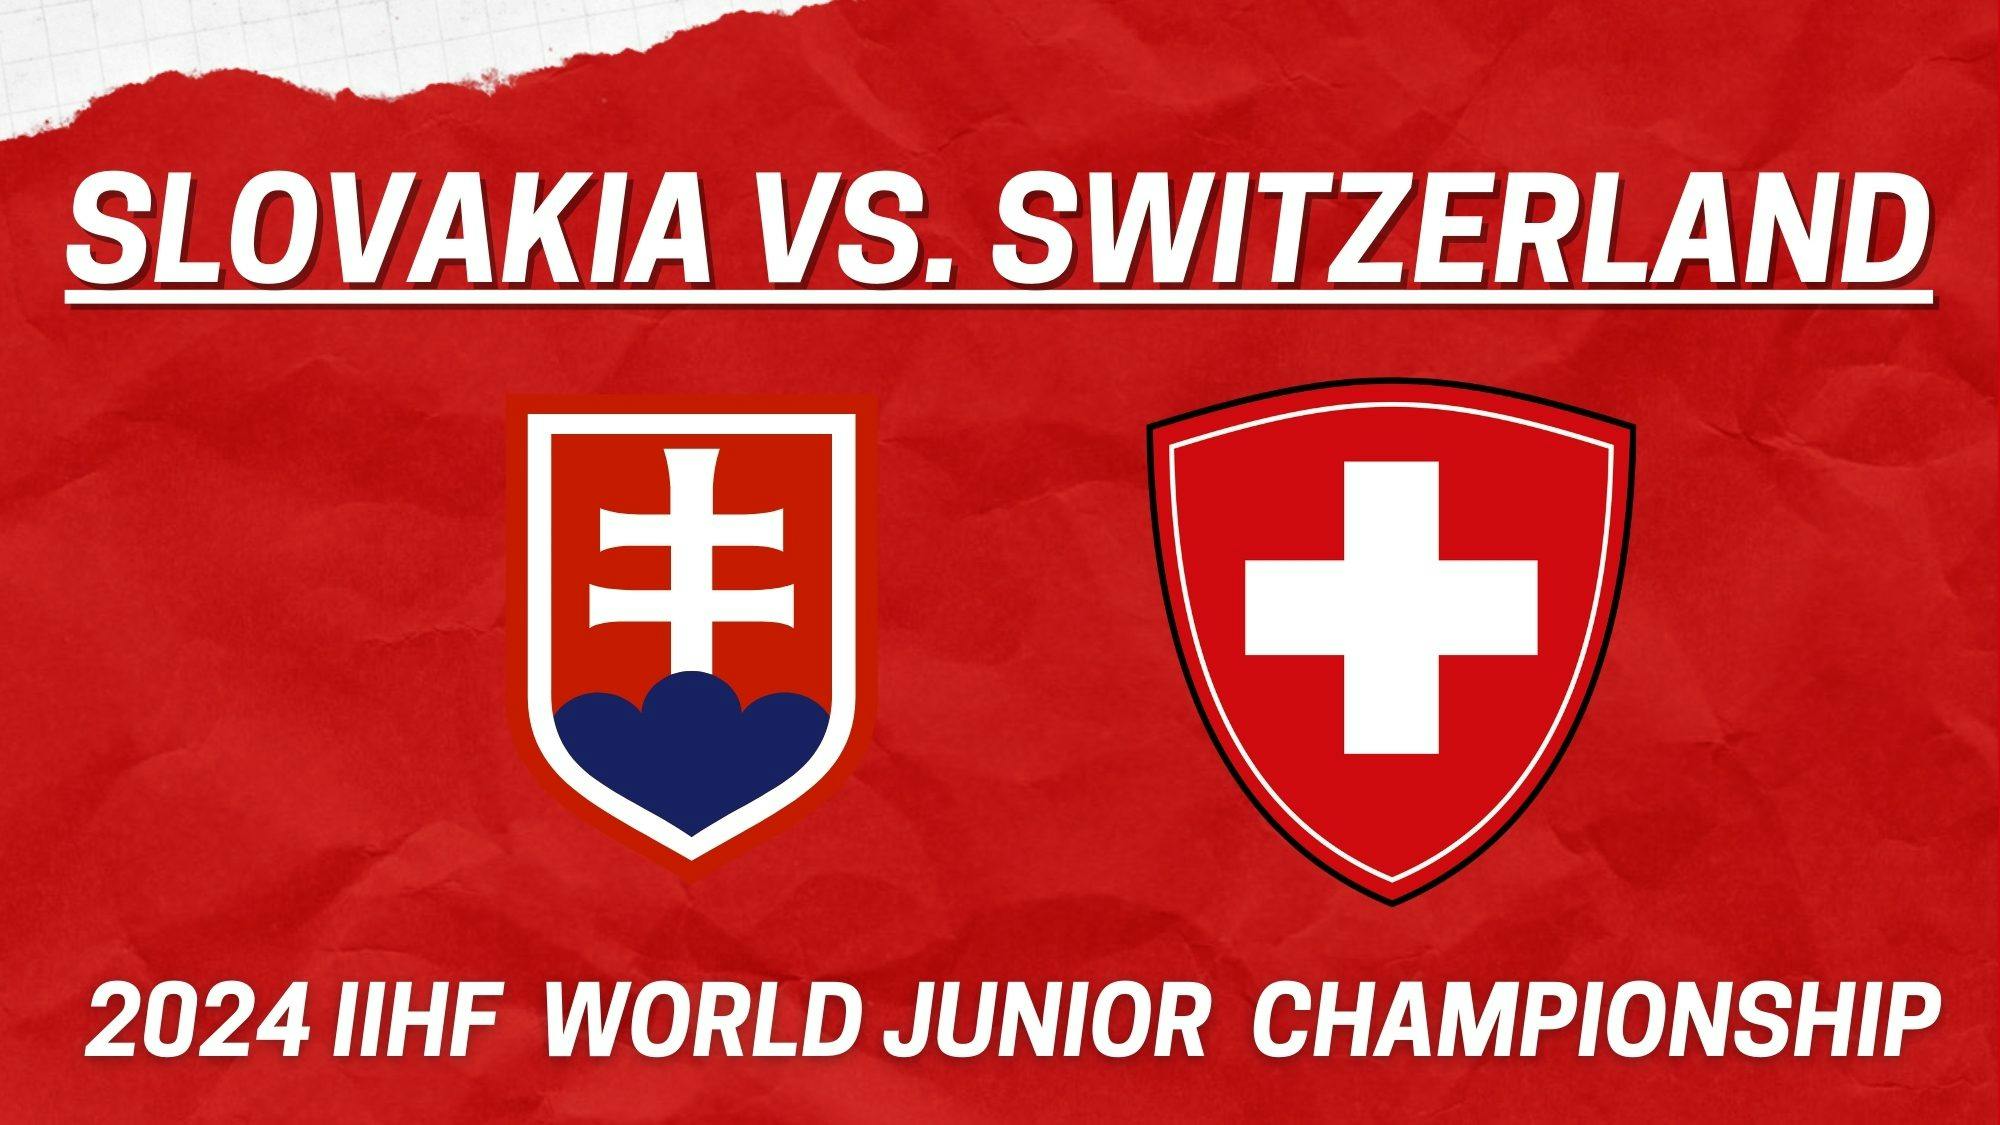 Top standouts from Slovakia vs. Switzerland at 2024 World Junior Championship